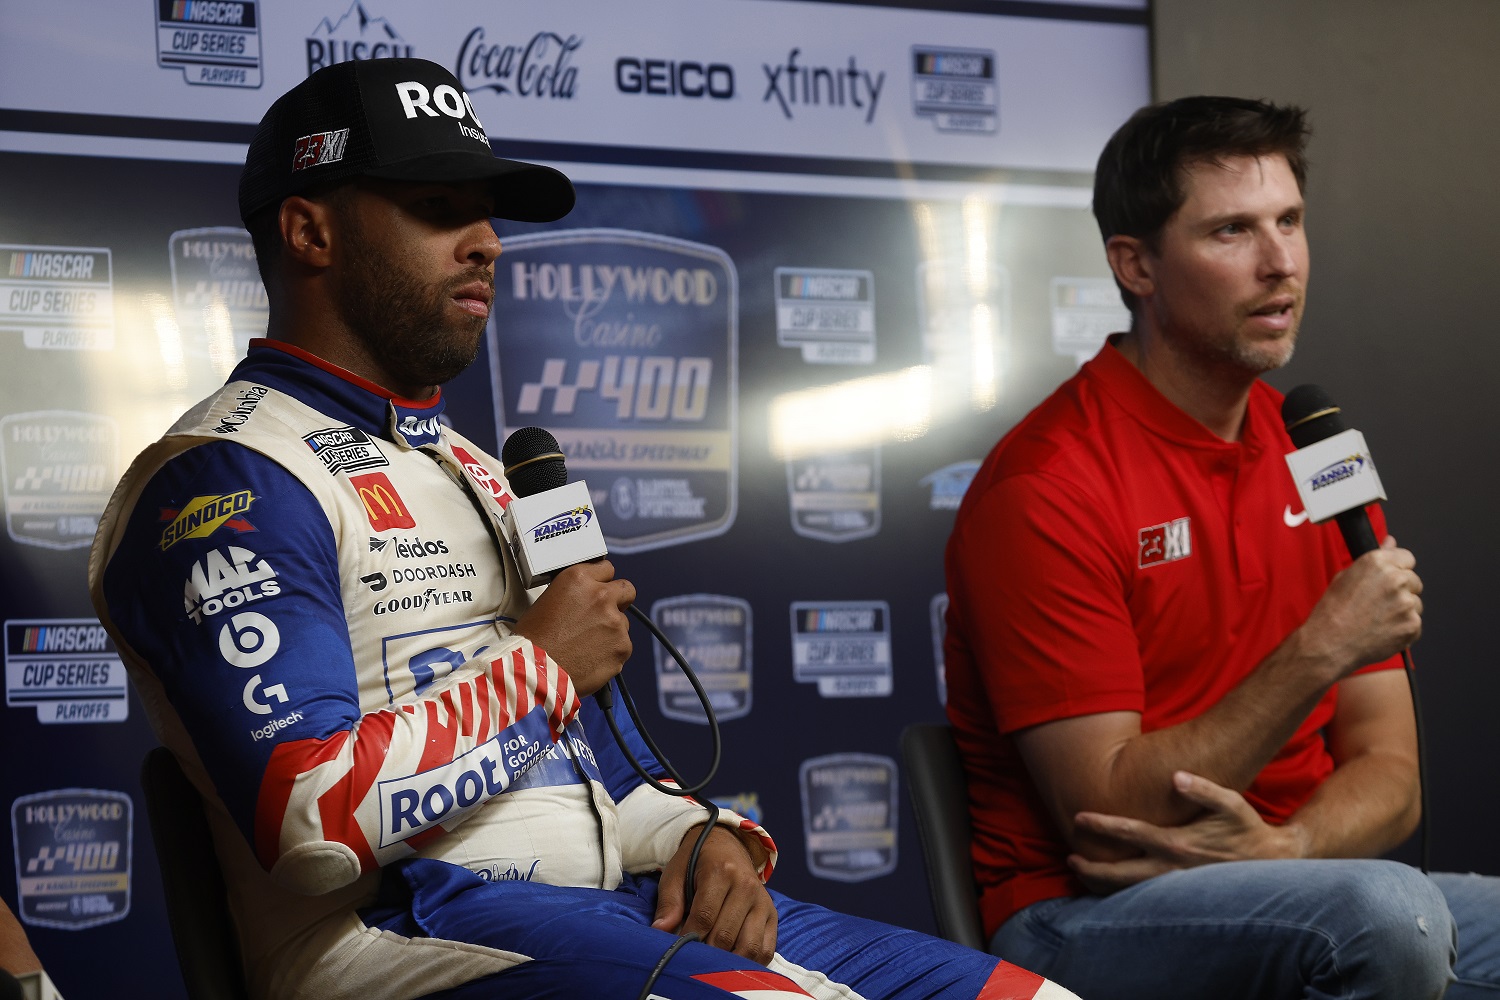 23XI Racing team co-owner Denny Hamlin and driver Bubba Wallace speak to the media during a press conference after winning the NASCAR Cup Series Hollywood Casino 400 at Kansas Speedway on Sept. 11, 2022.